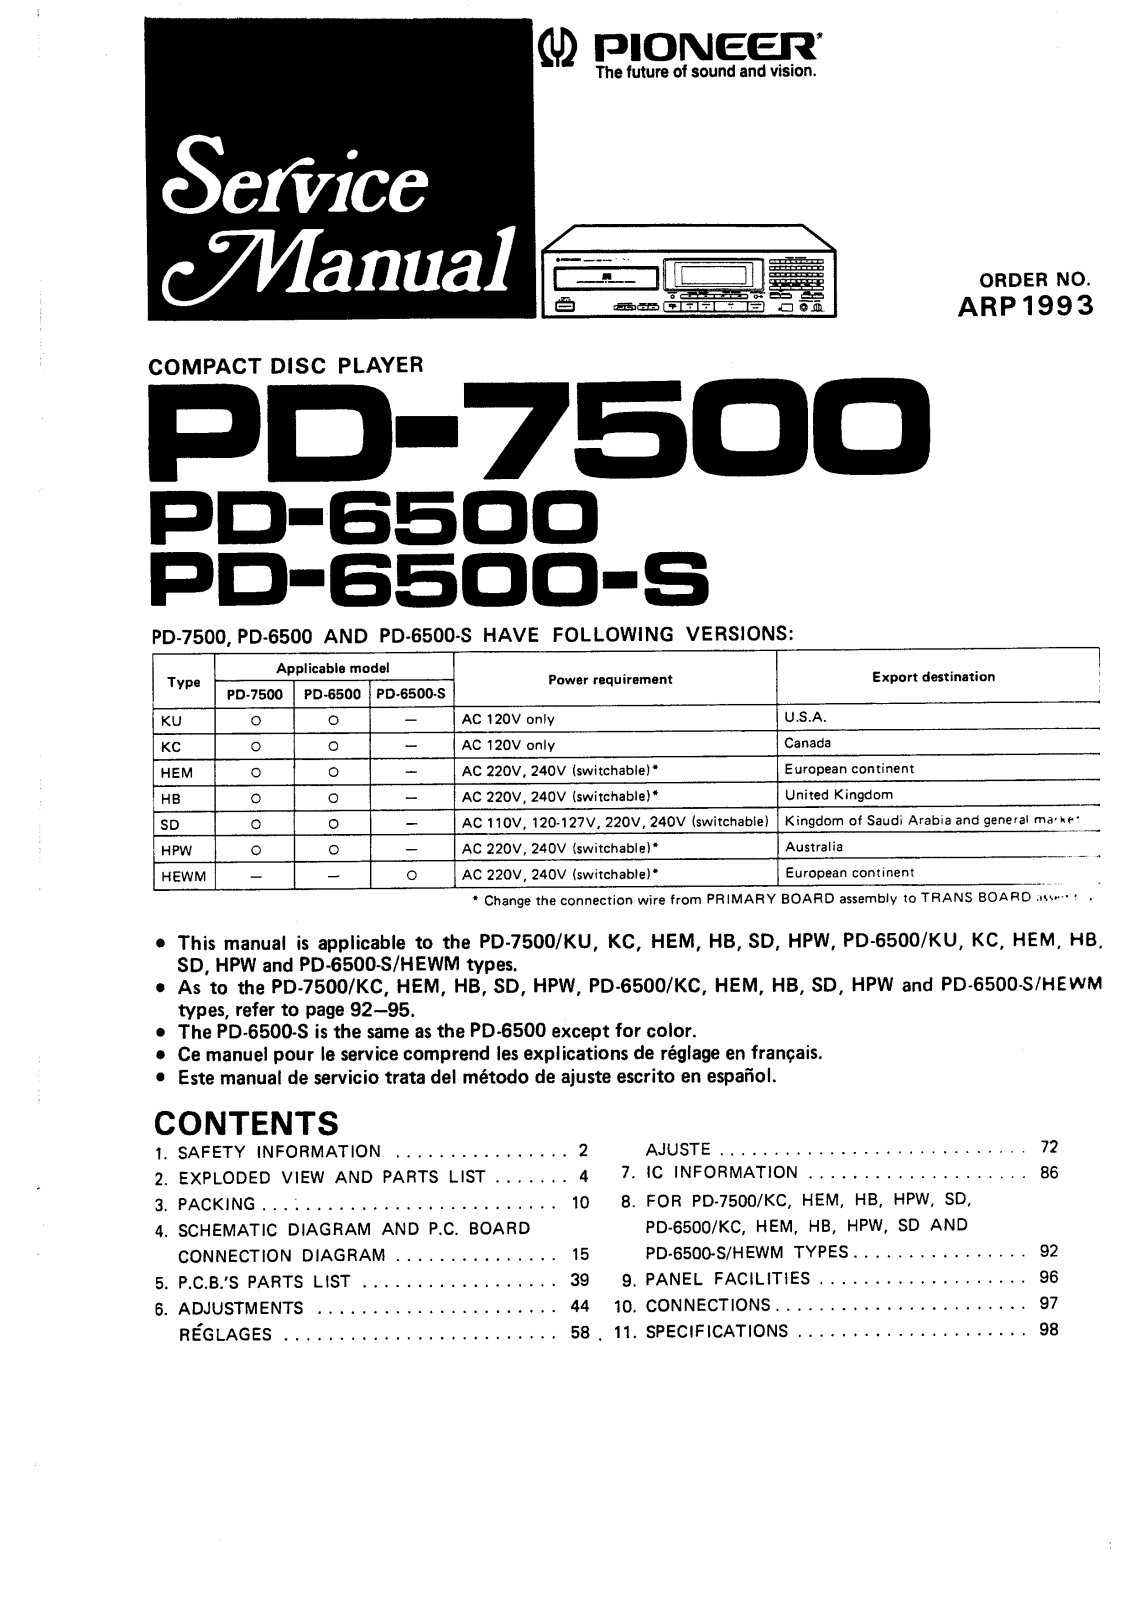 Pioneer PD-6500, PD-6500-S, PD-7500 Service manual